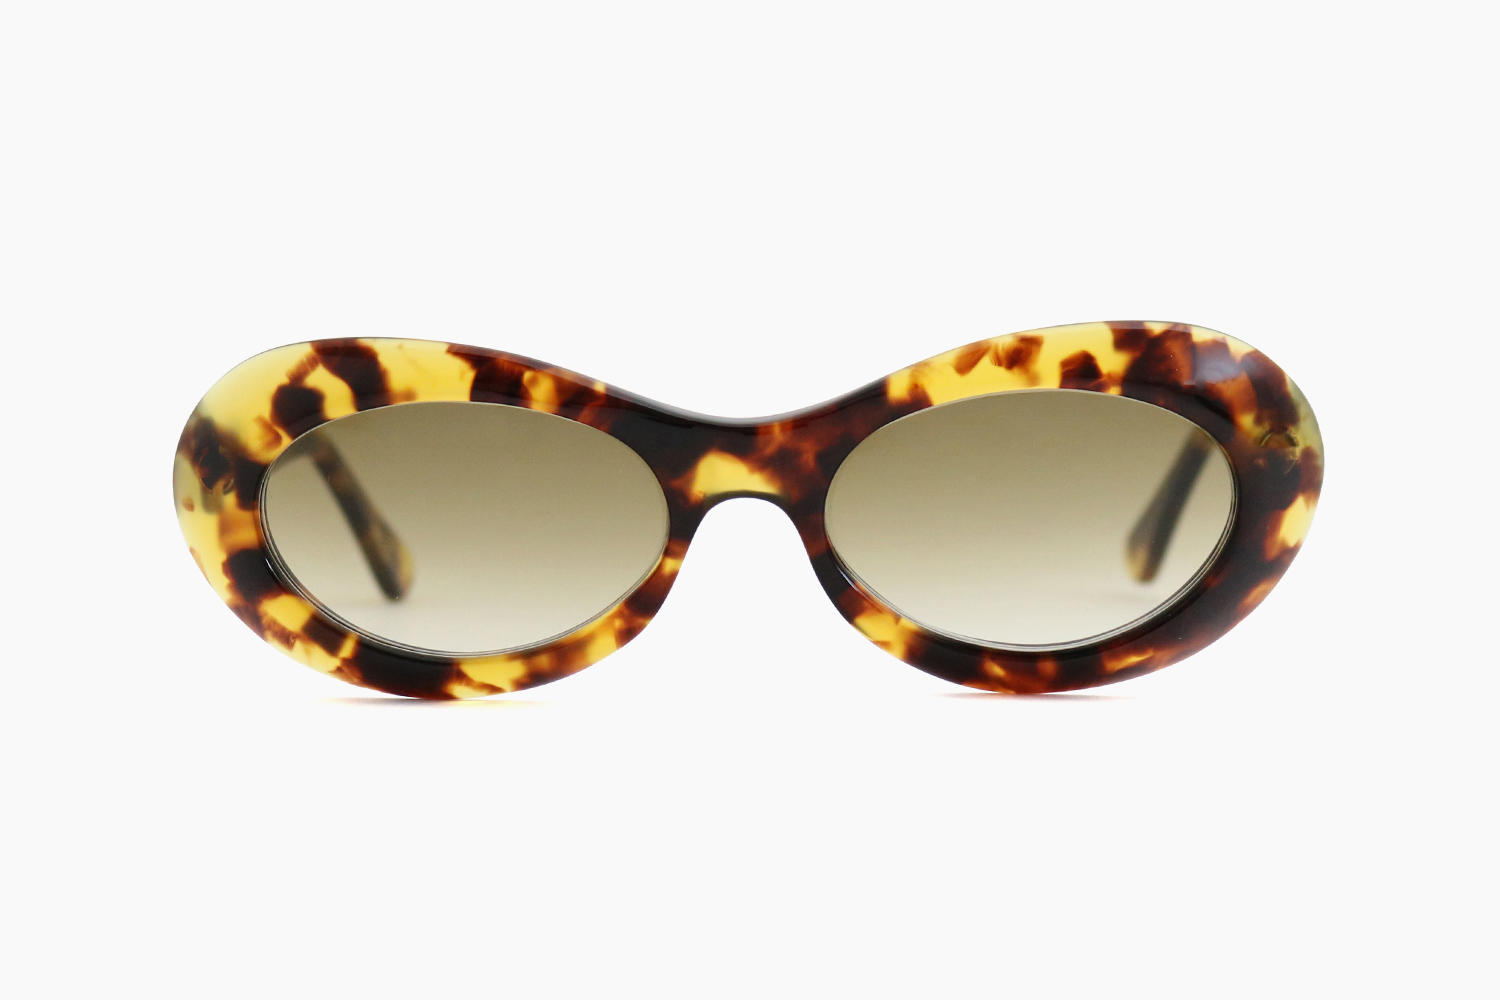 OLIVER GOLDSMITH｜BUDE SG UK - DARK LEOPARD｜PRODUCT｜Continuer